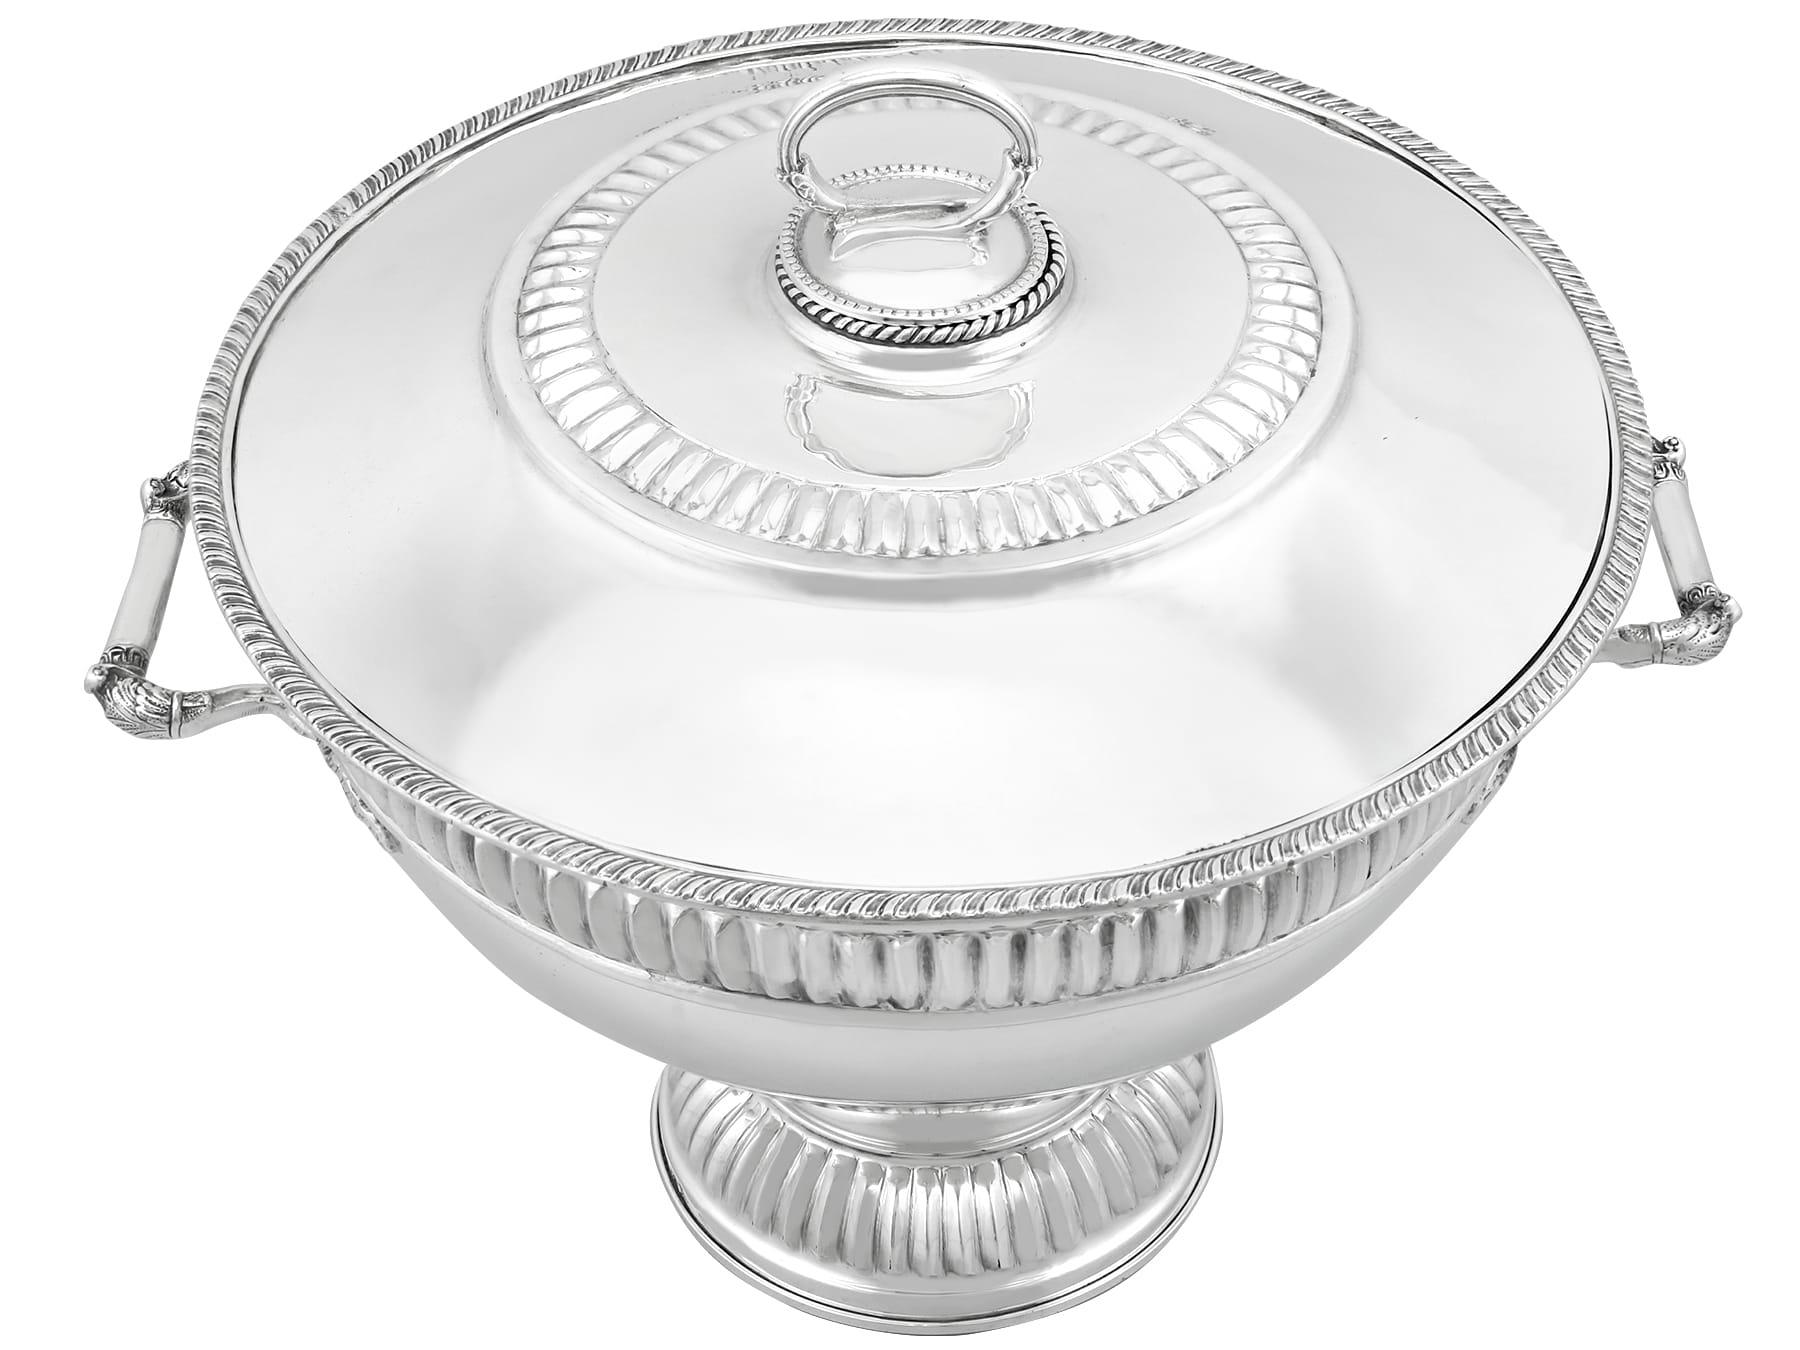 Late 20th Century Vintage European Silver Soup Tureen For Sale